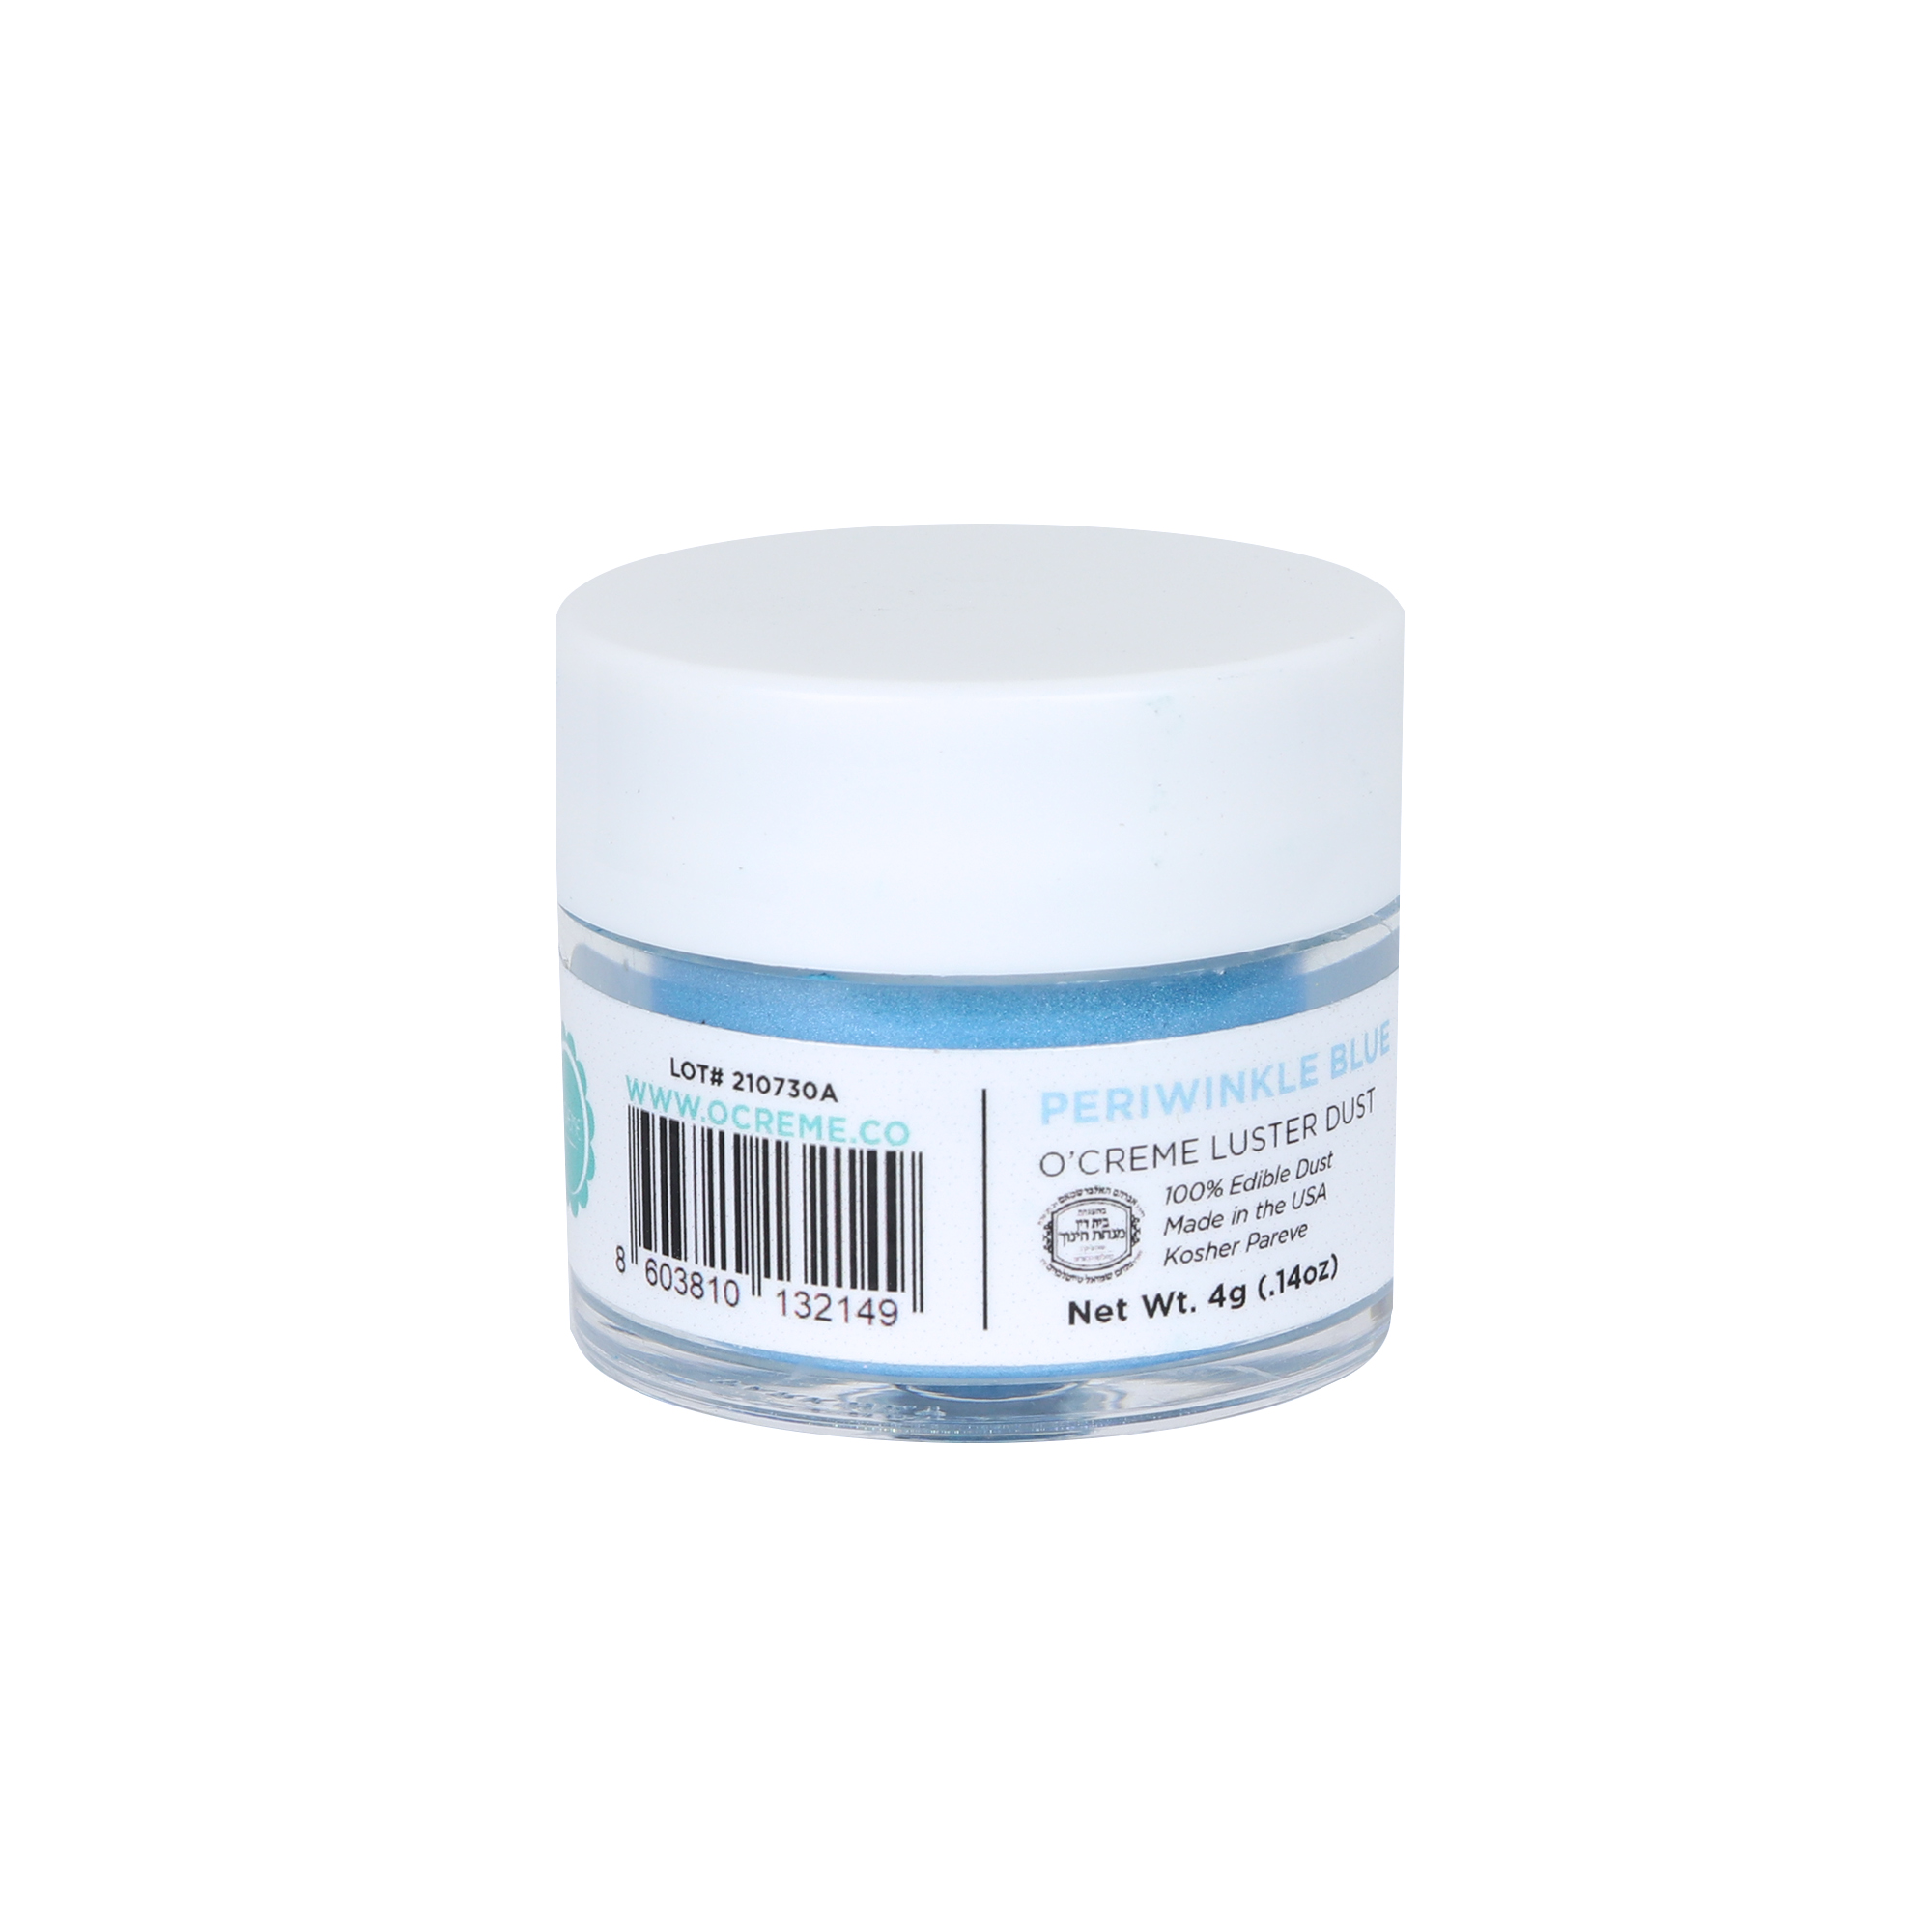 O'Creme Periwinkle Blue Luster Dust, 4 gr. image 1